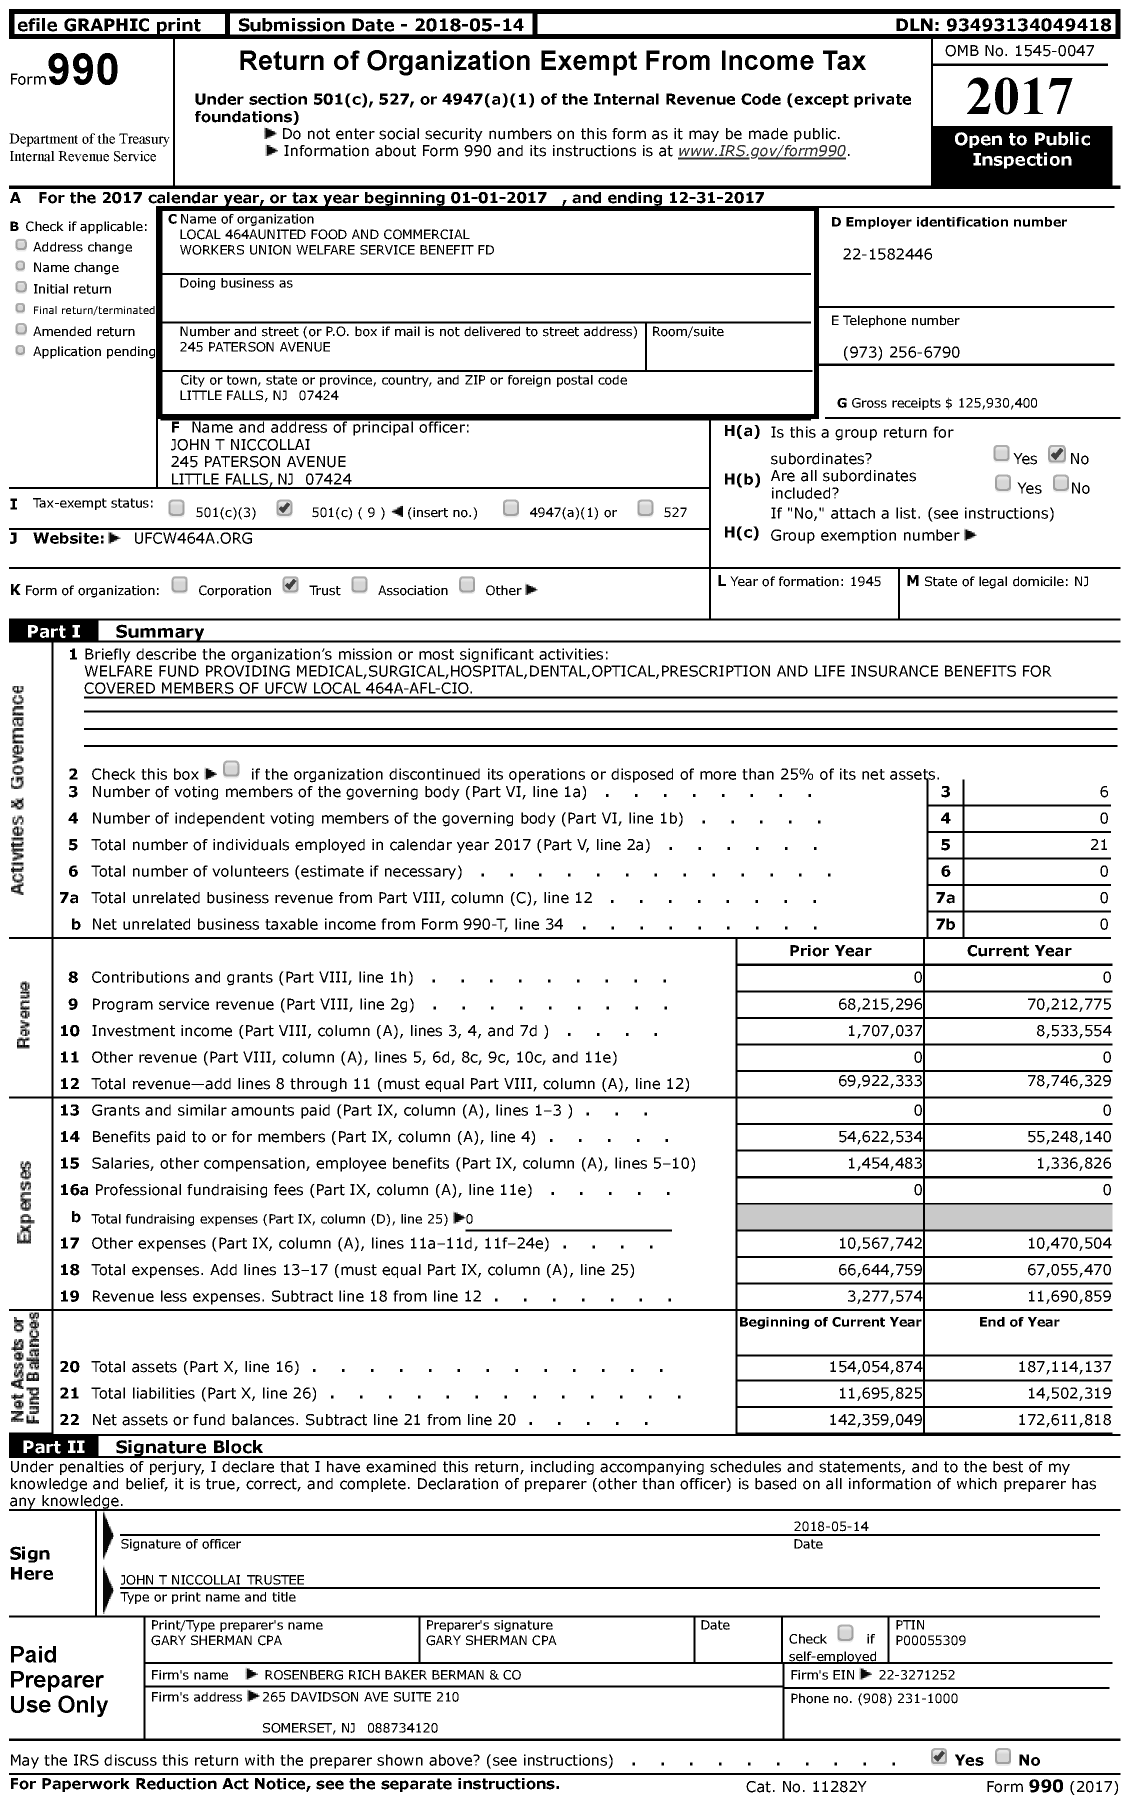 Image of first page of 2017 Form 990 for Local 464A United Food and Commercial Workers Union Welfare Service Benefit Fund